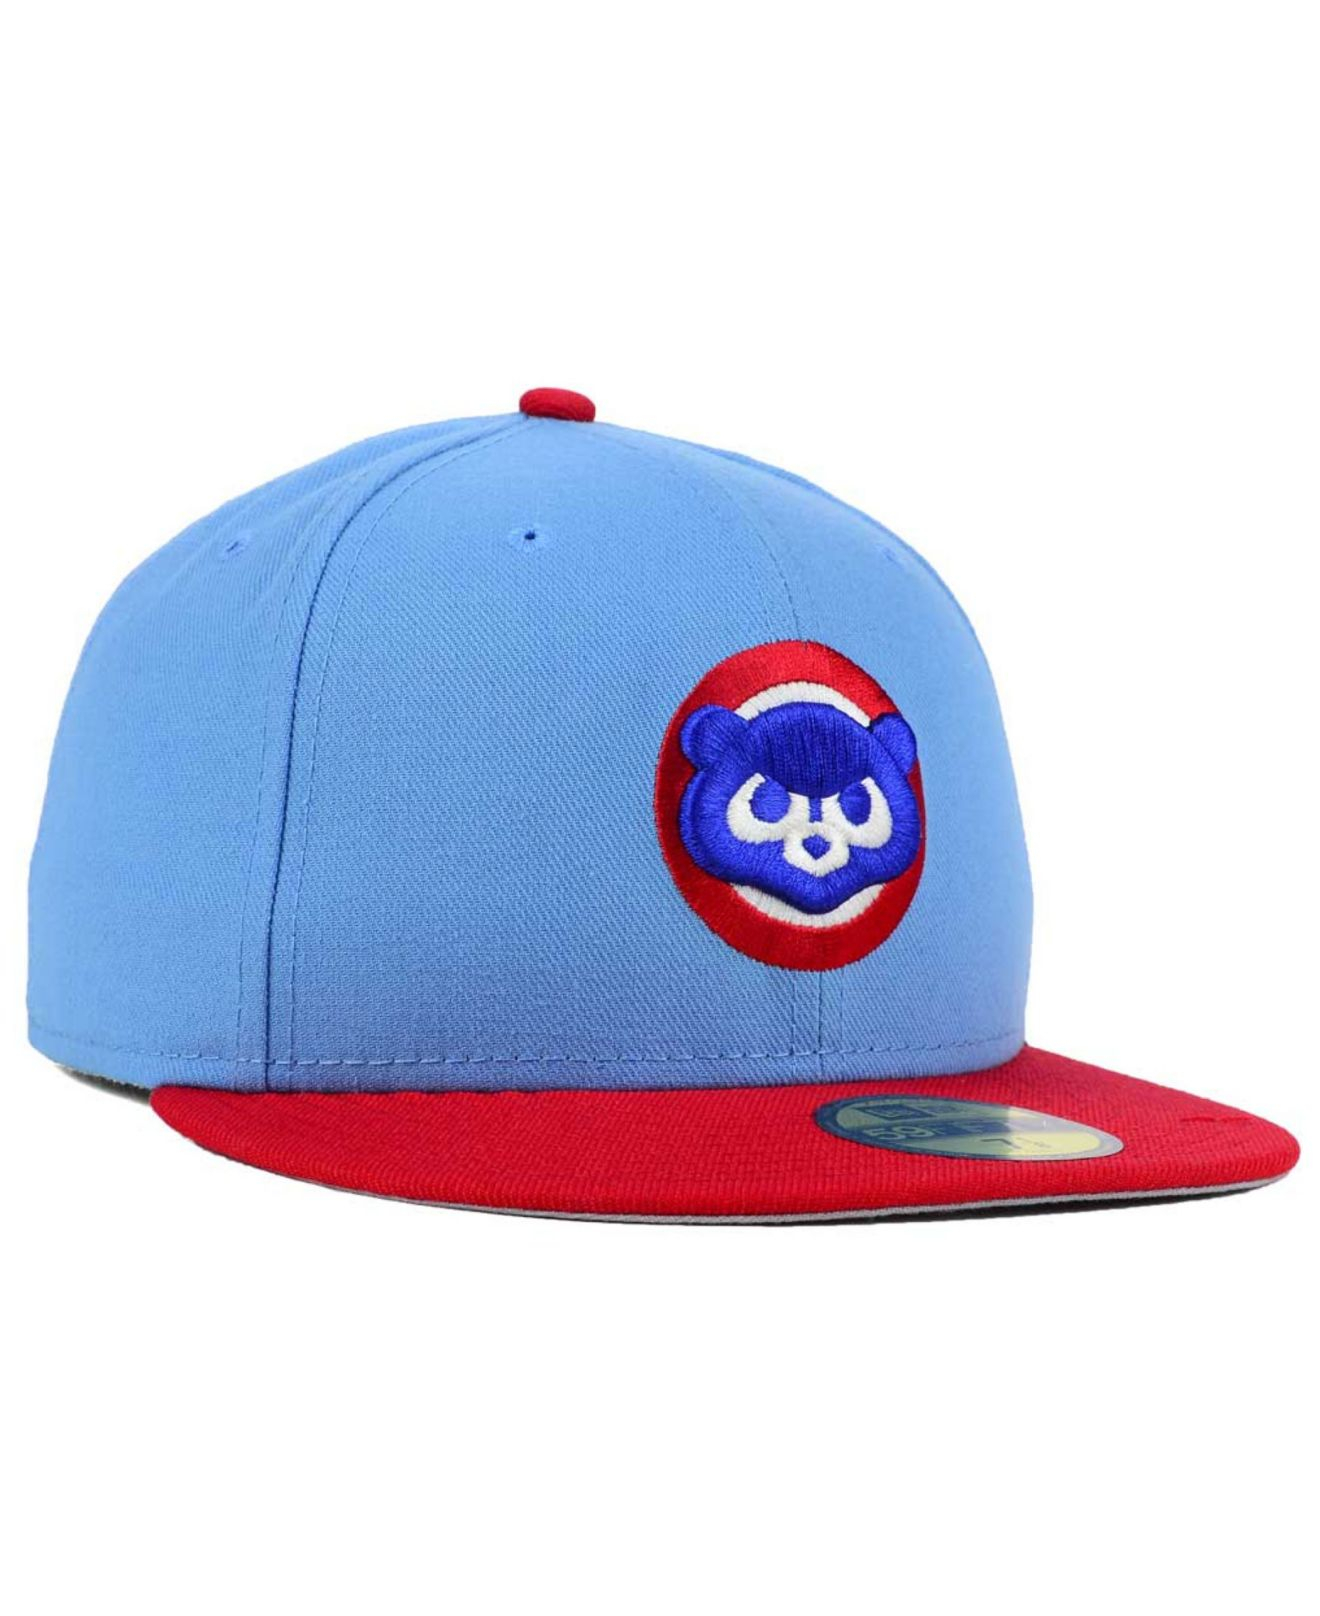 KTZ Chicago Cubs Cooperstown 2 Tone in Blue for Lyst